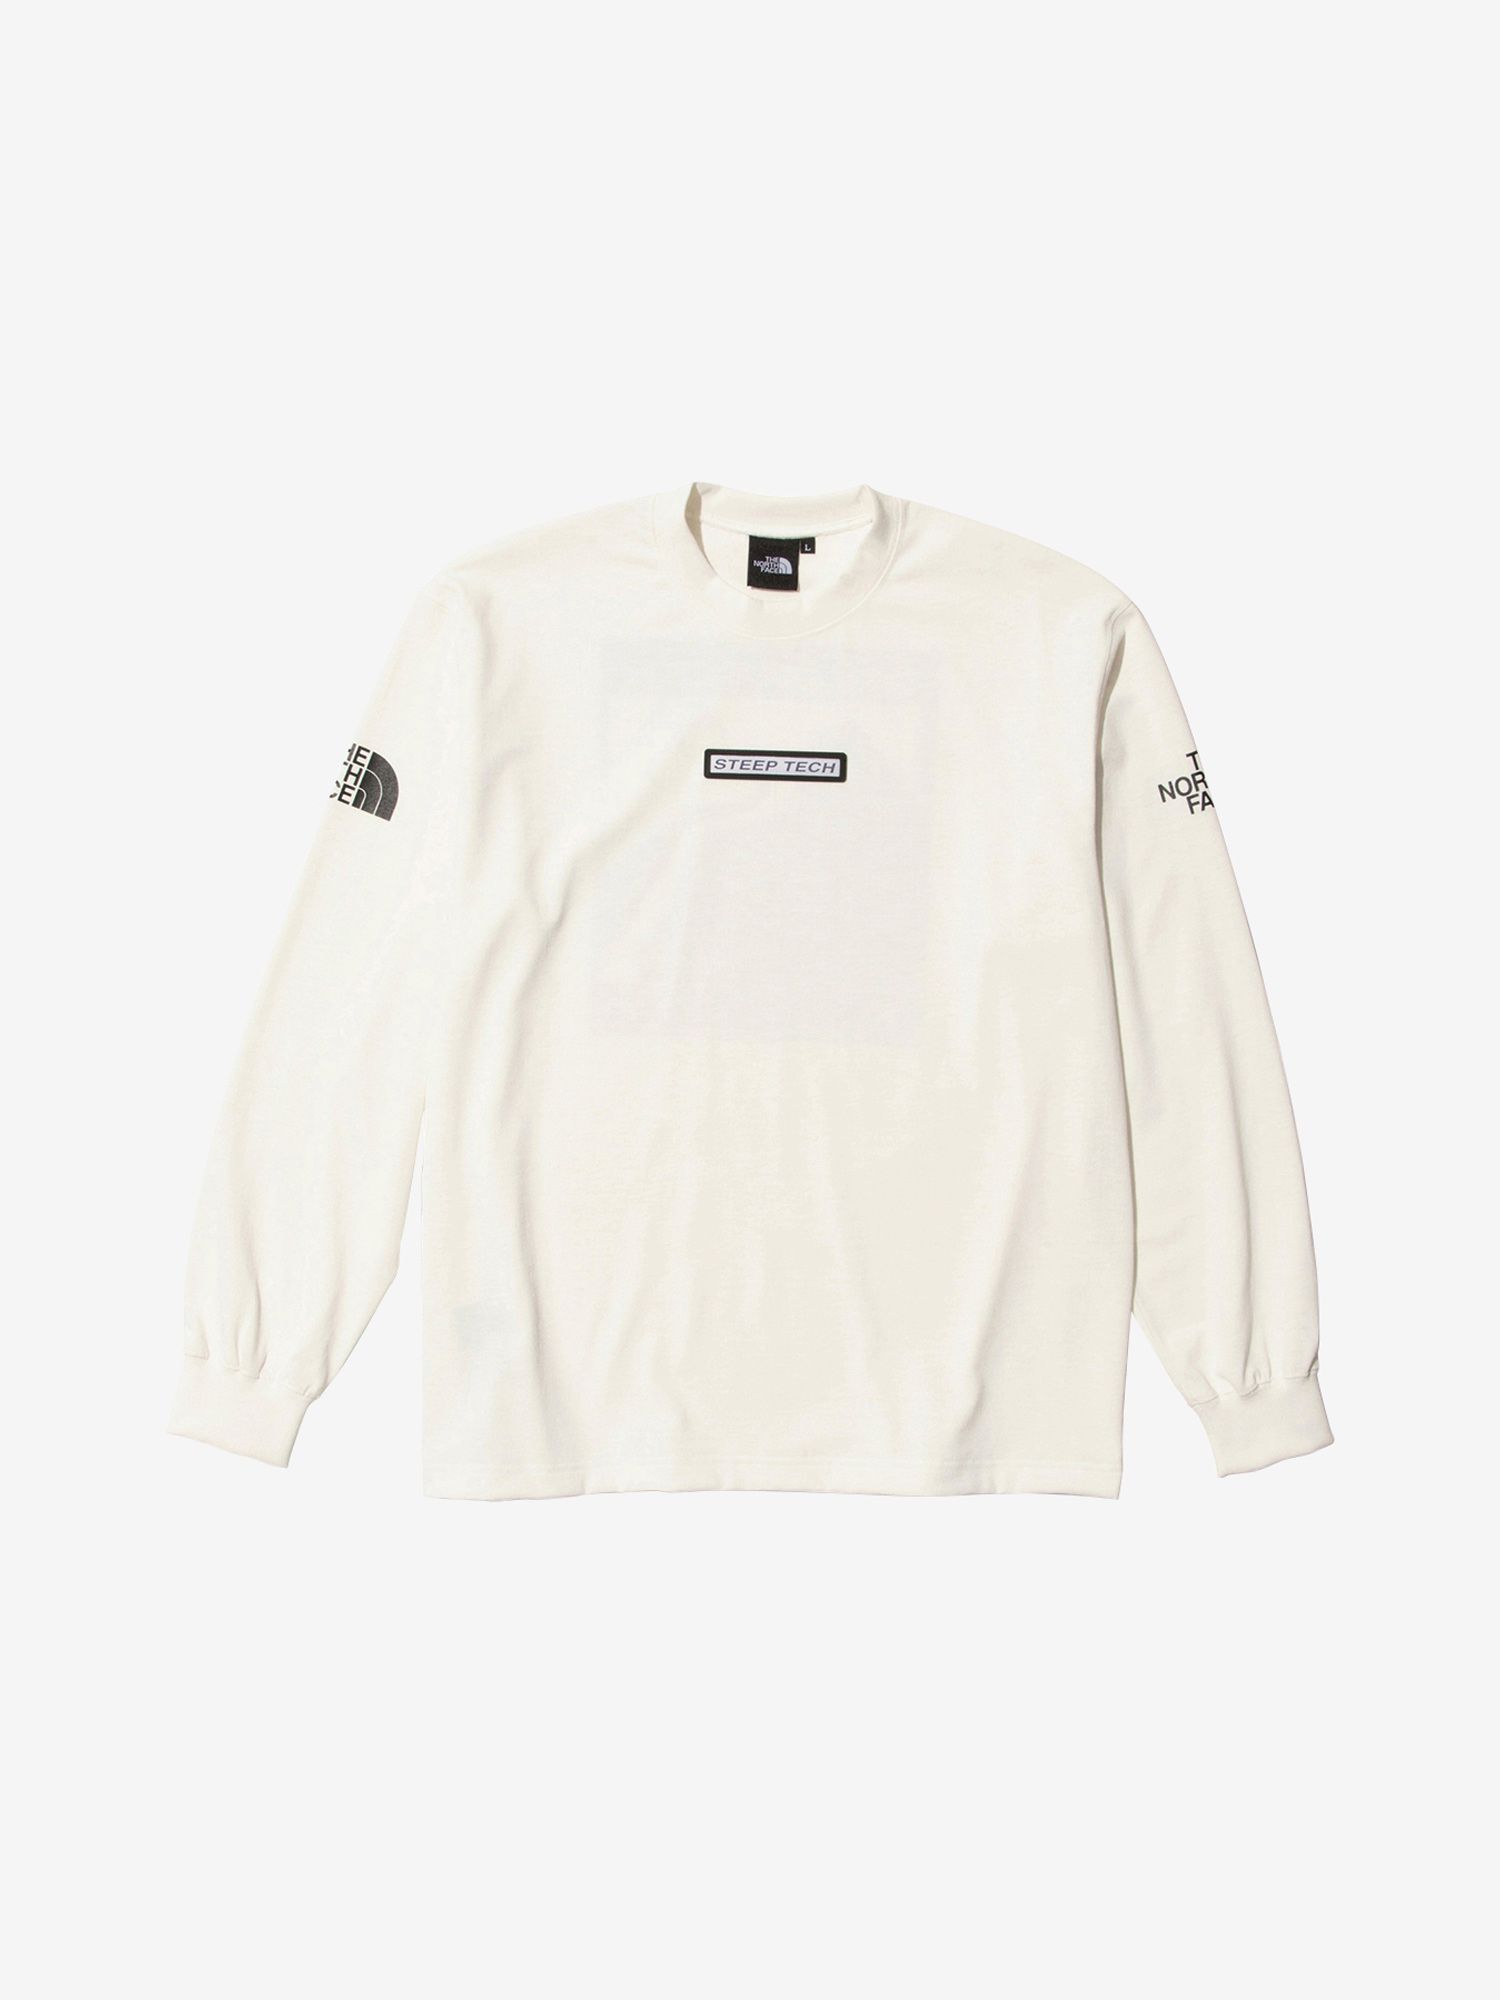 THE NORTH FACE STEEP TECH L/S Tee